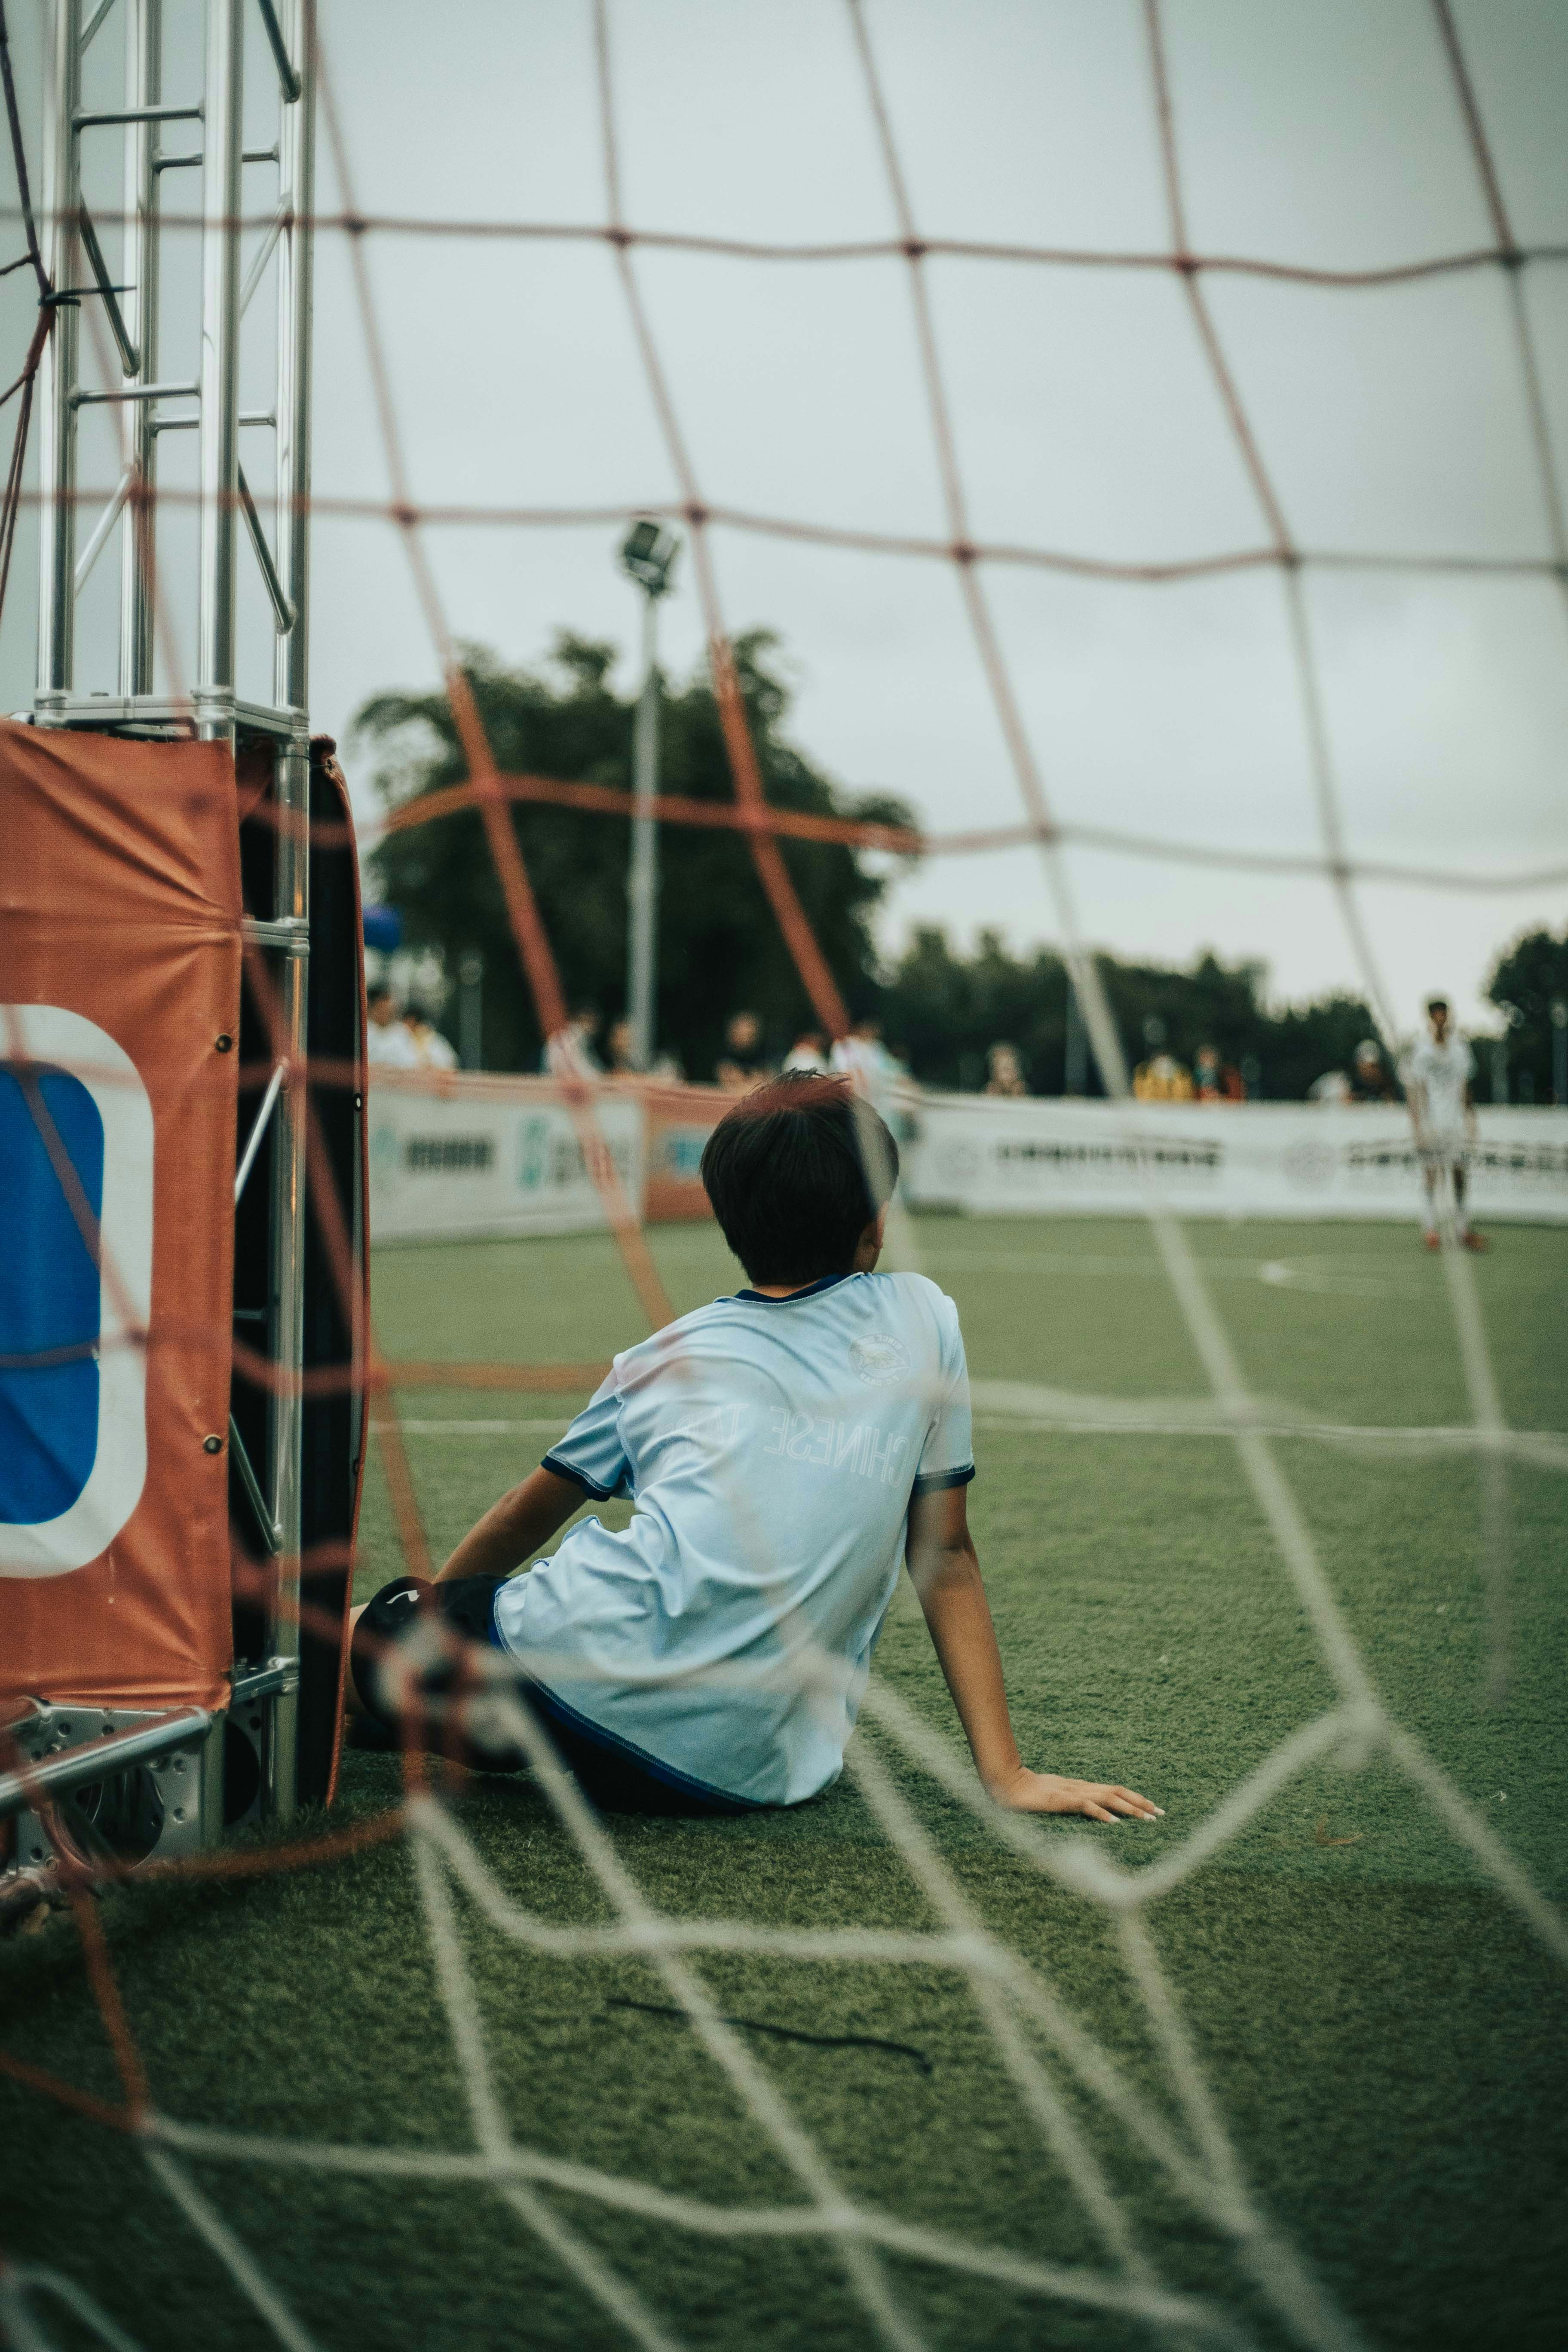 Choose from a curated selection of soccer photos. Always free on Unsplash.